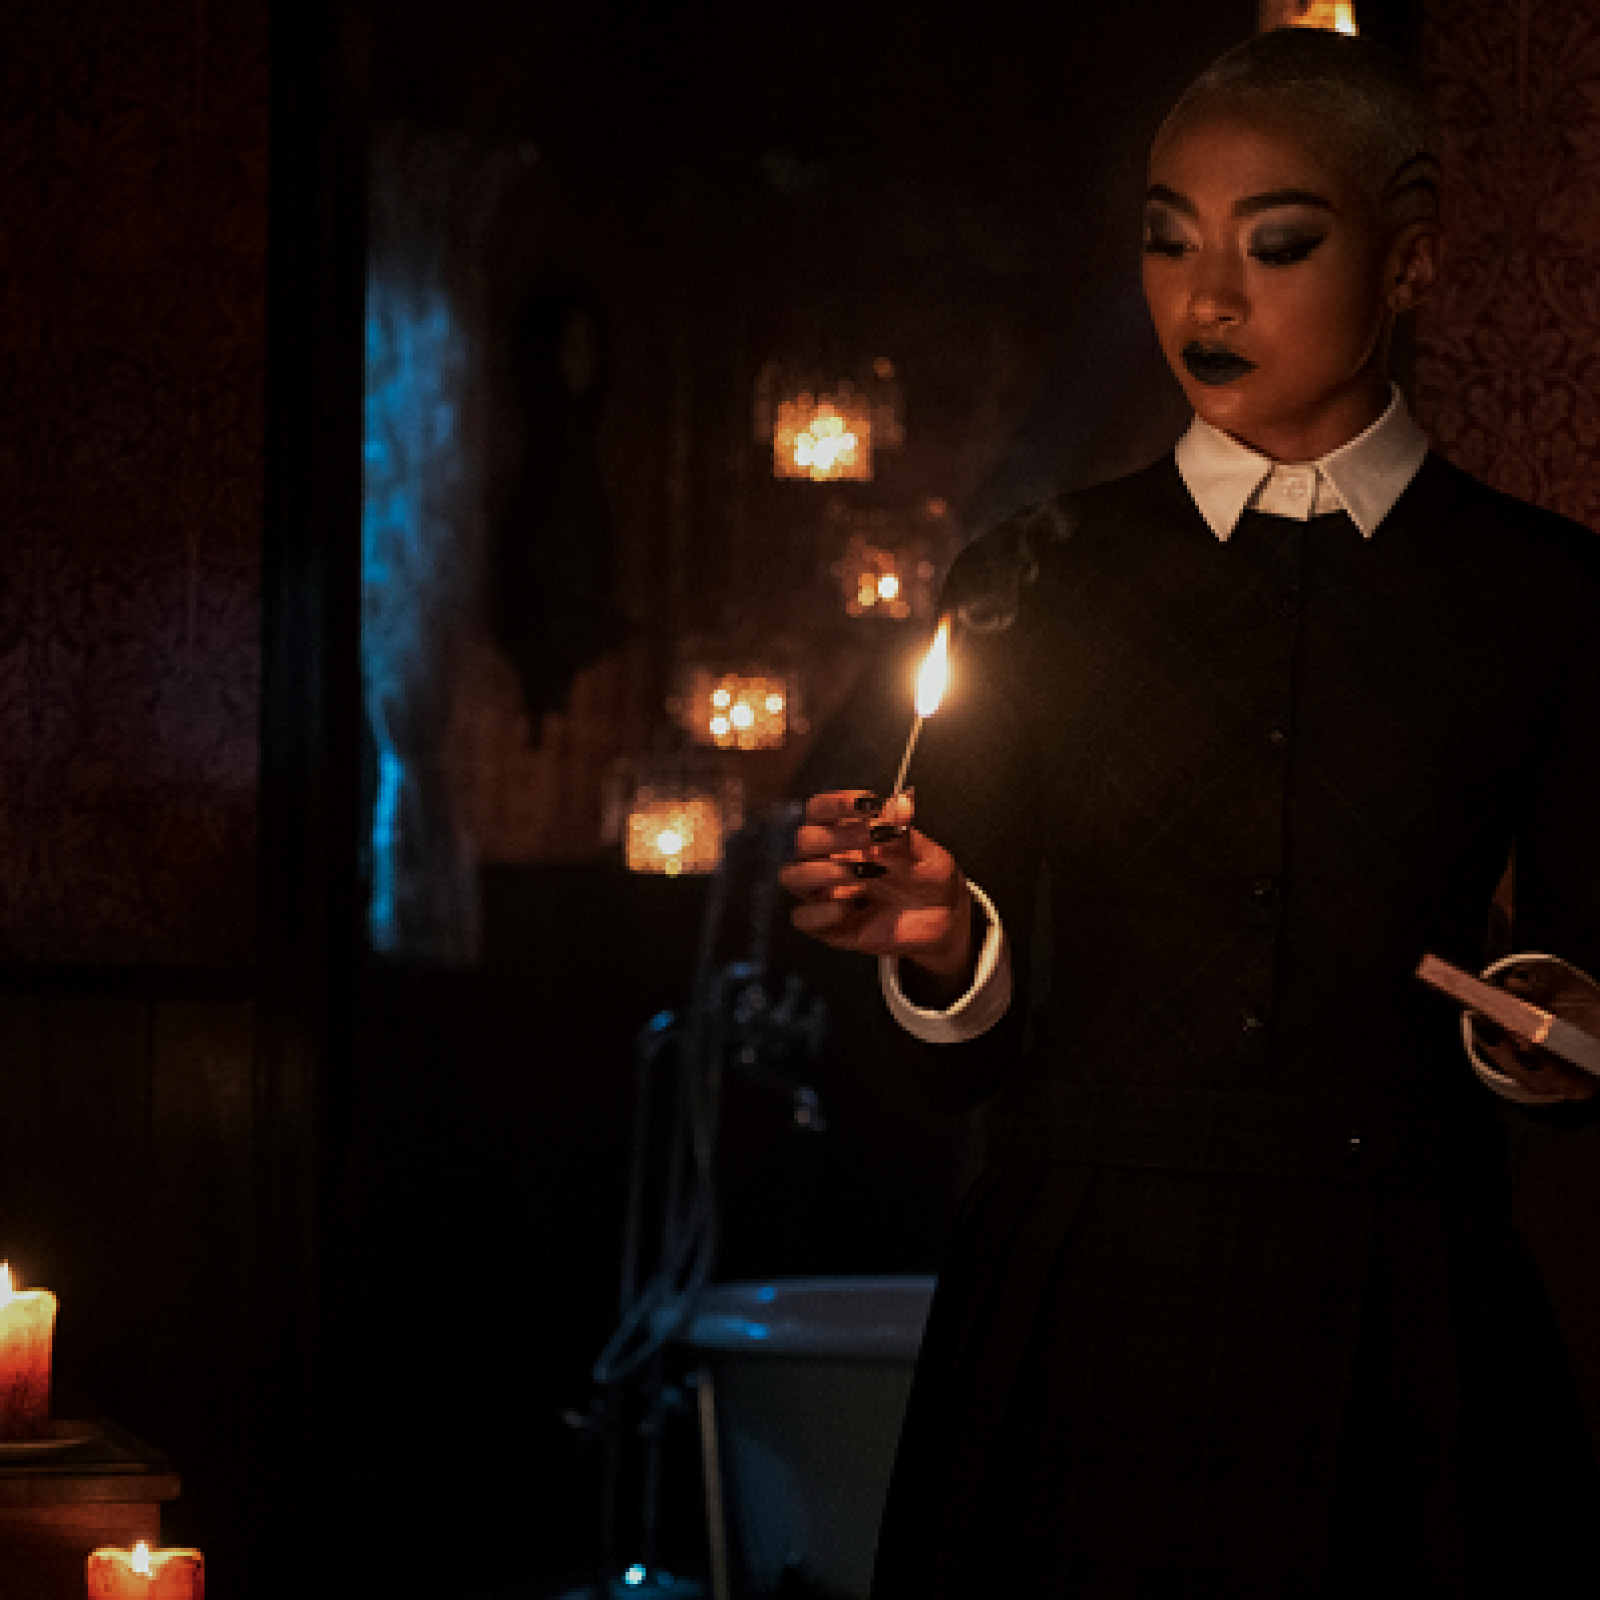 How I Shop: Tati Gabrielle of 'Chilling Adventures of Sabrina